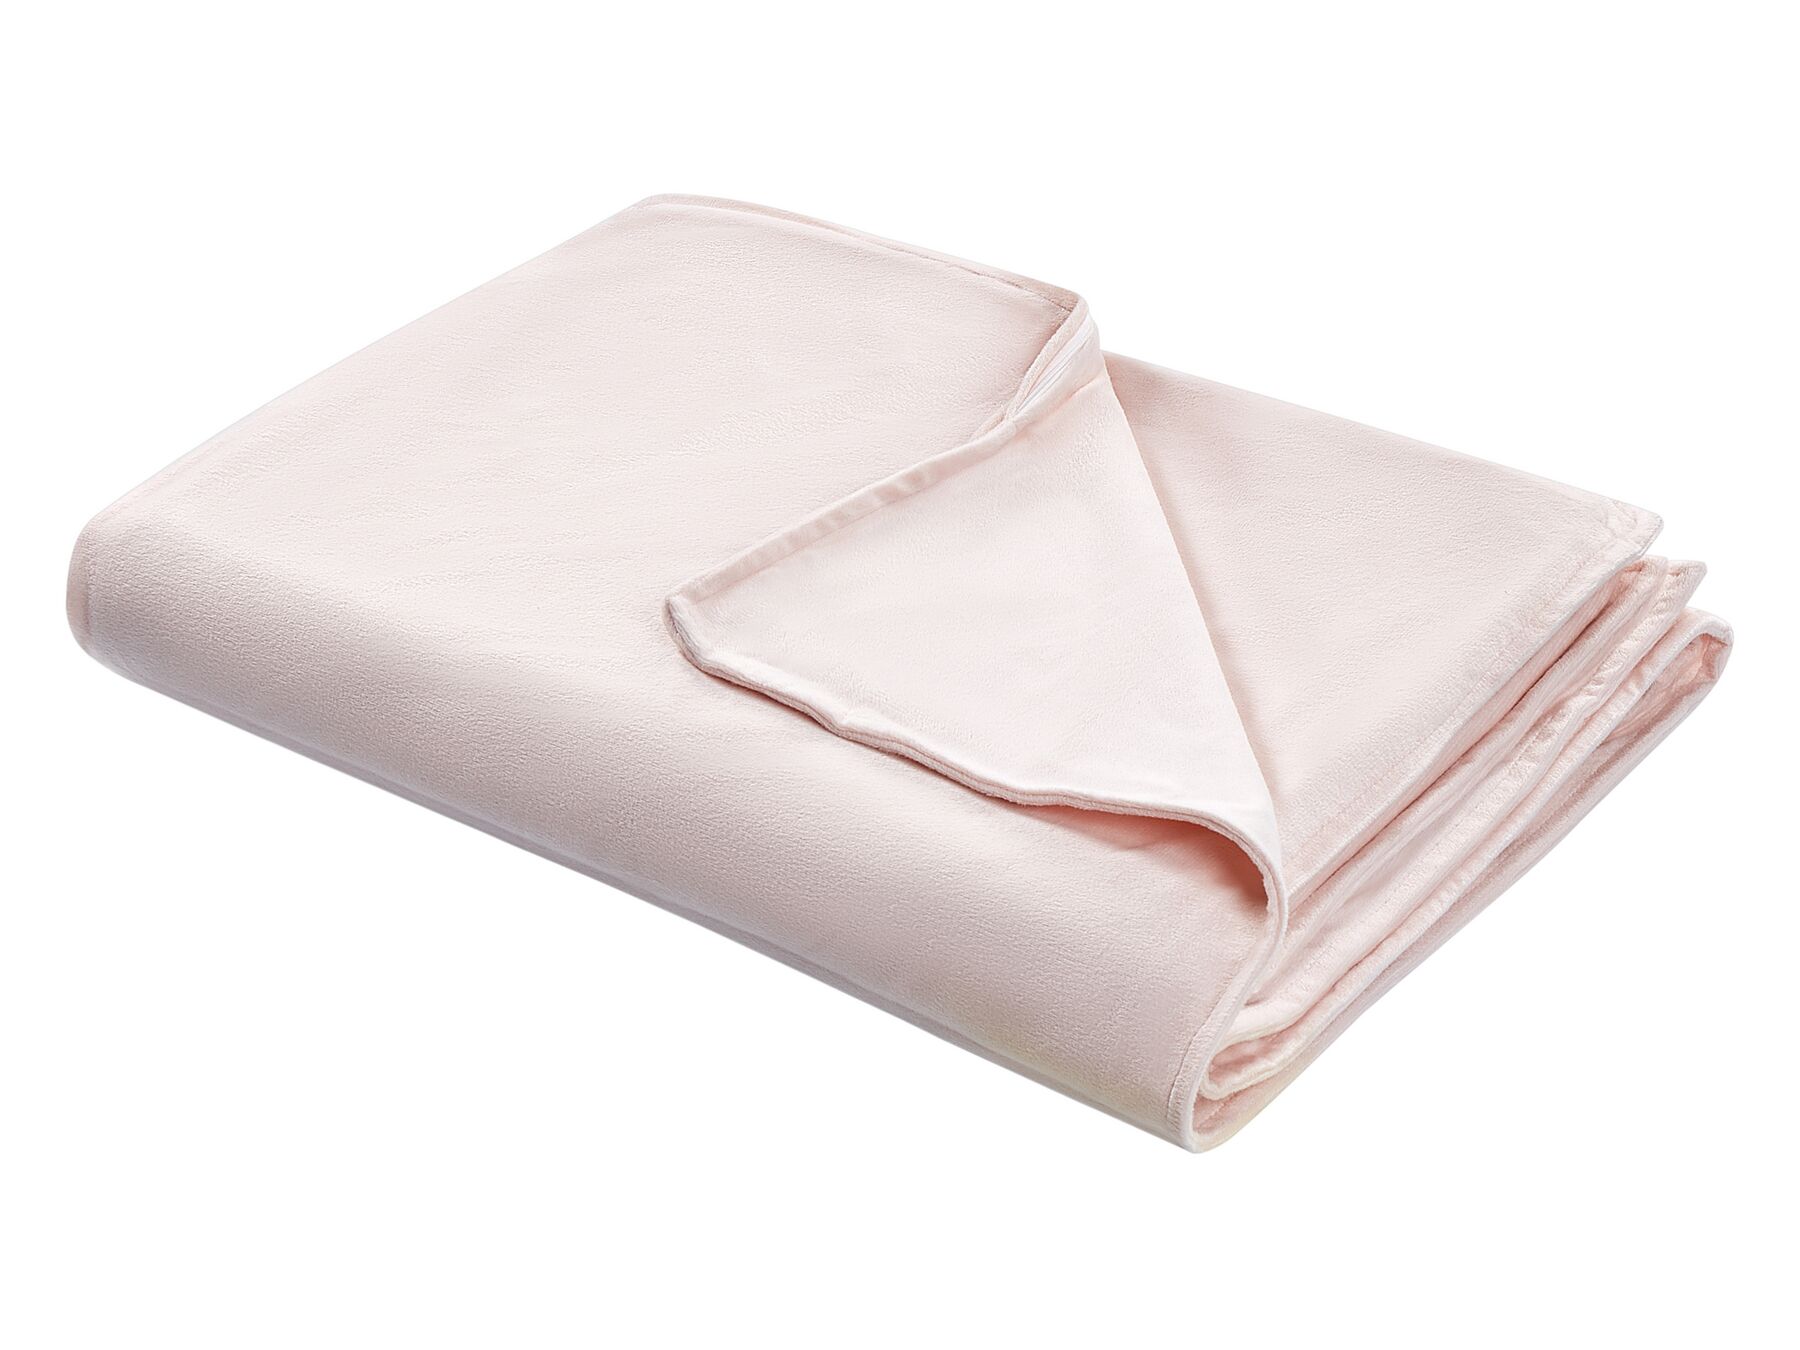 Weighted Blanket Cover 120 x 180 cm Pink RHEA_891609